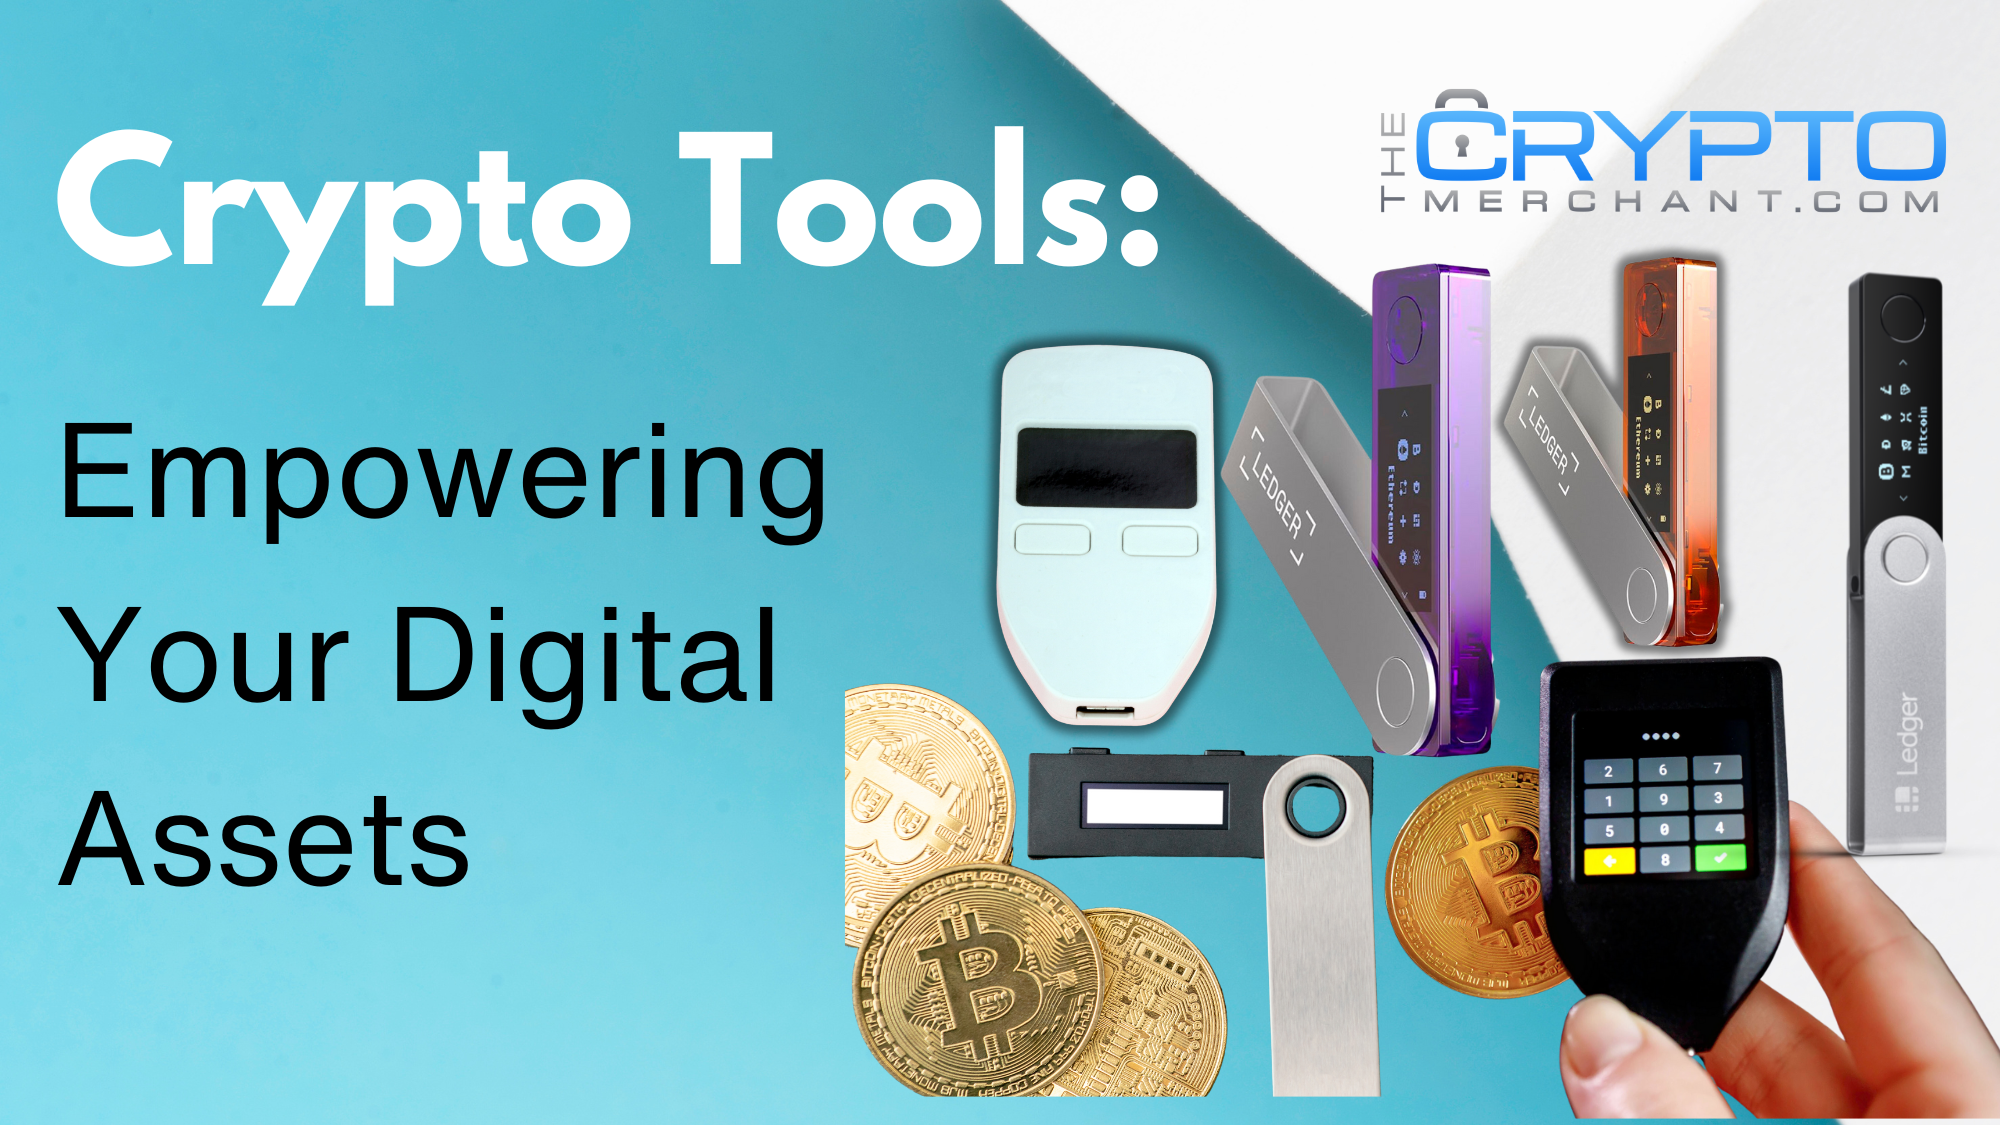 Crypto Tools: Empowering Your Digital Assets